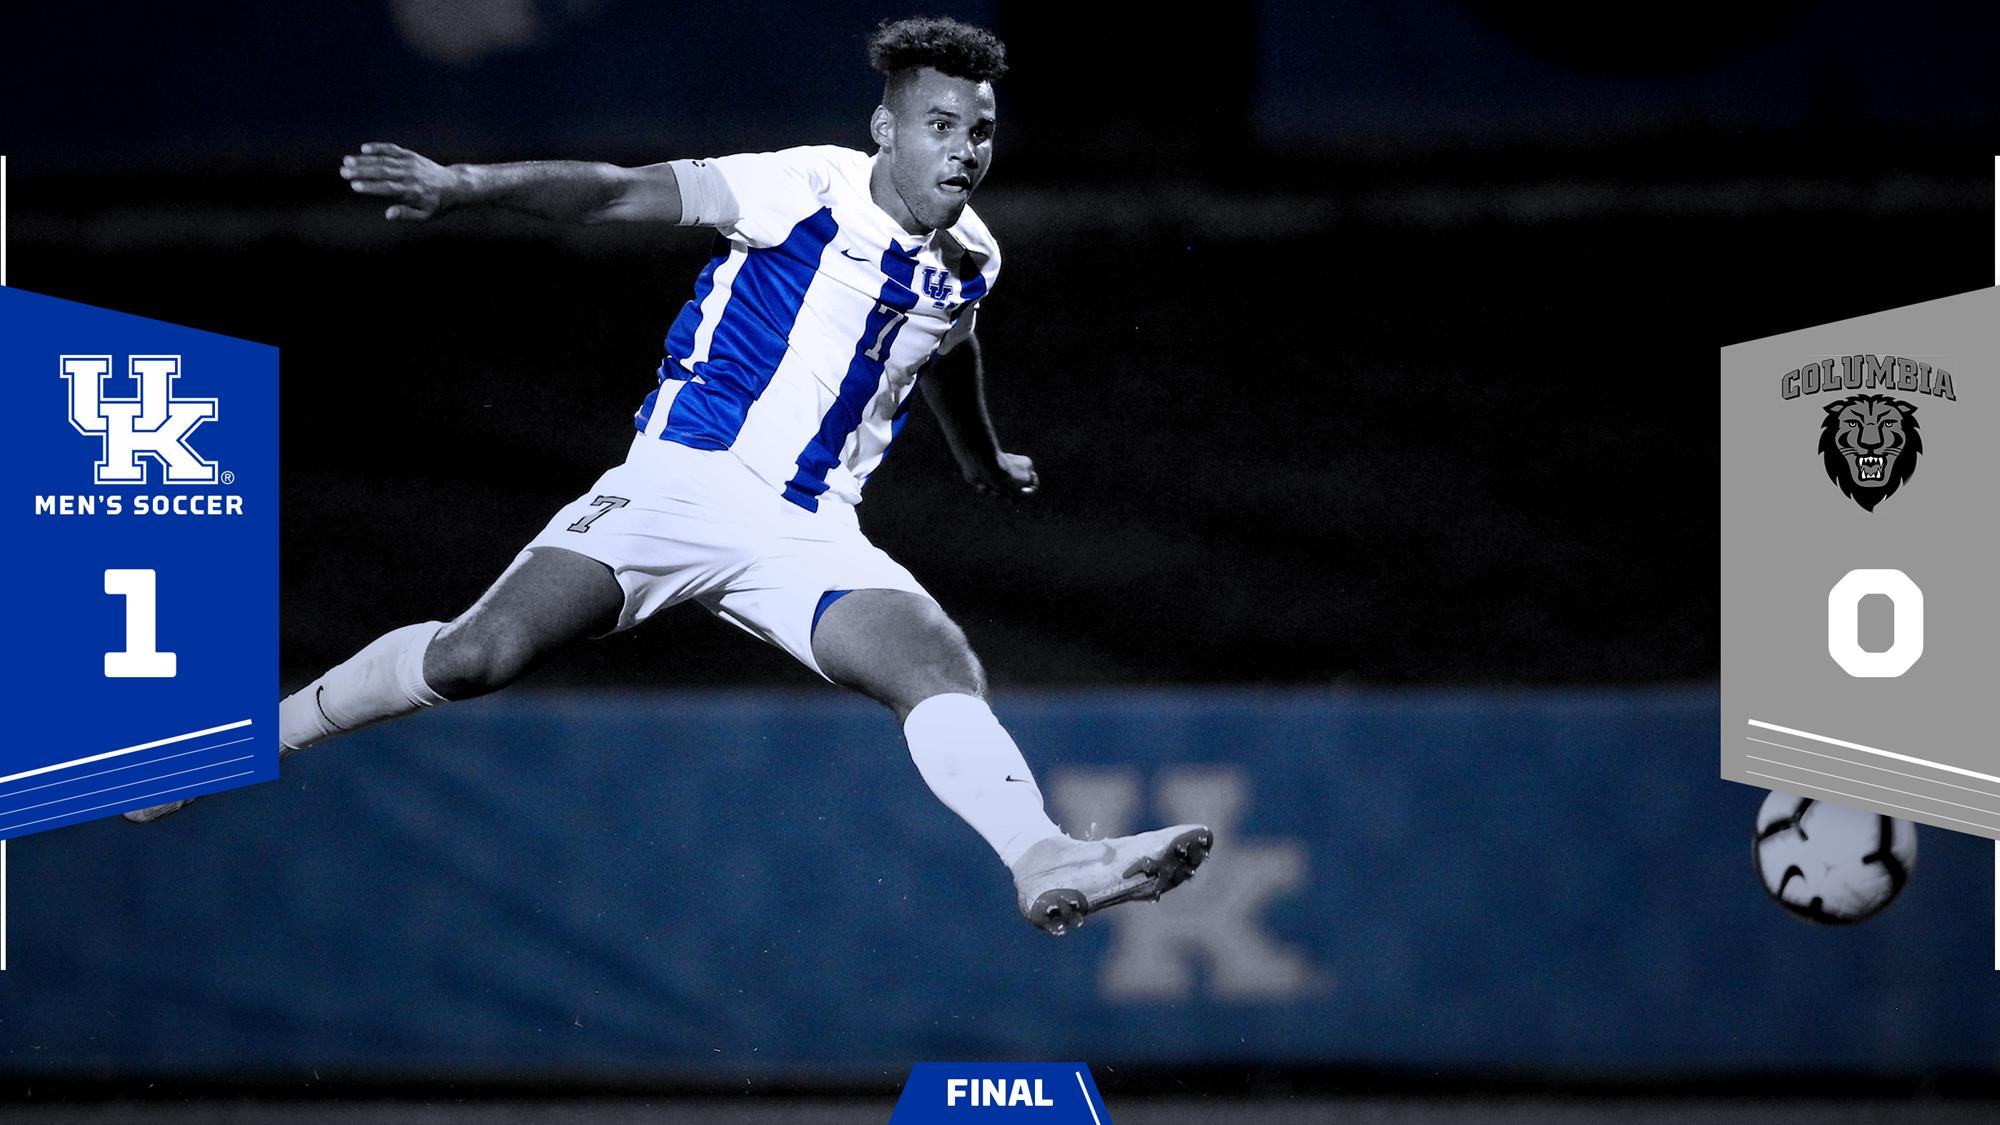 Williams Goal Gives UK Soccer Another 1-0 Friday Win